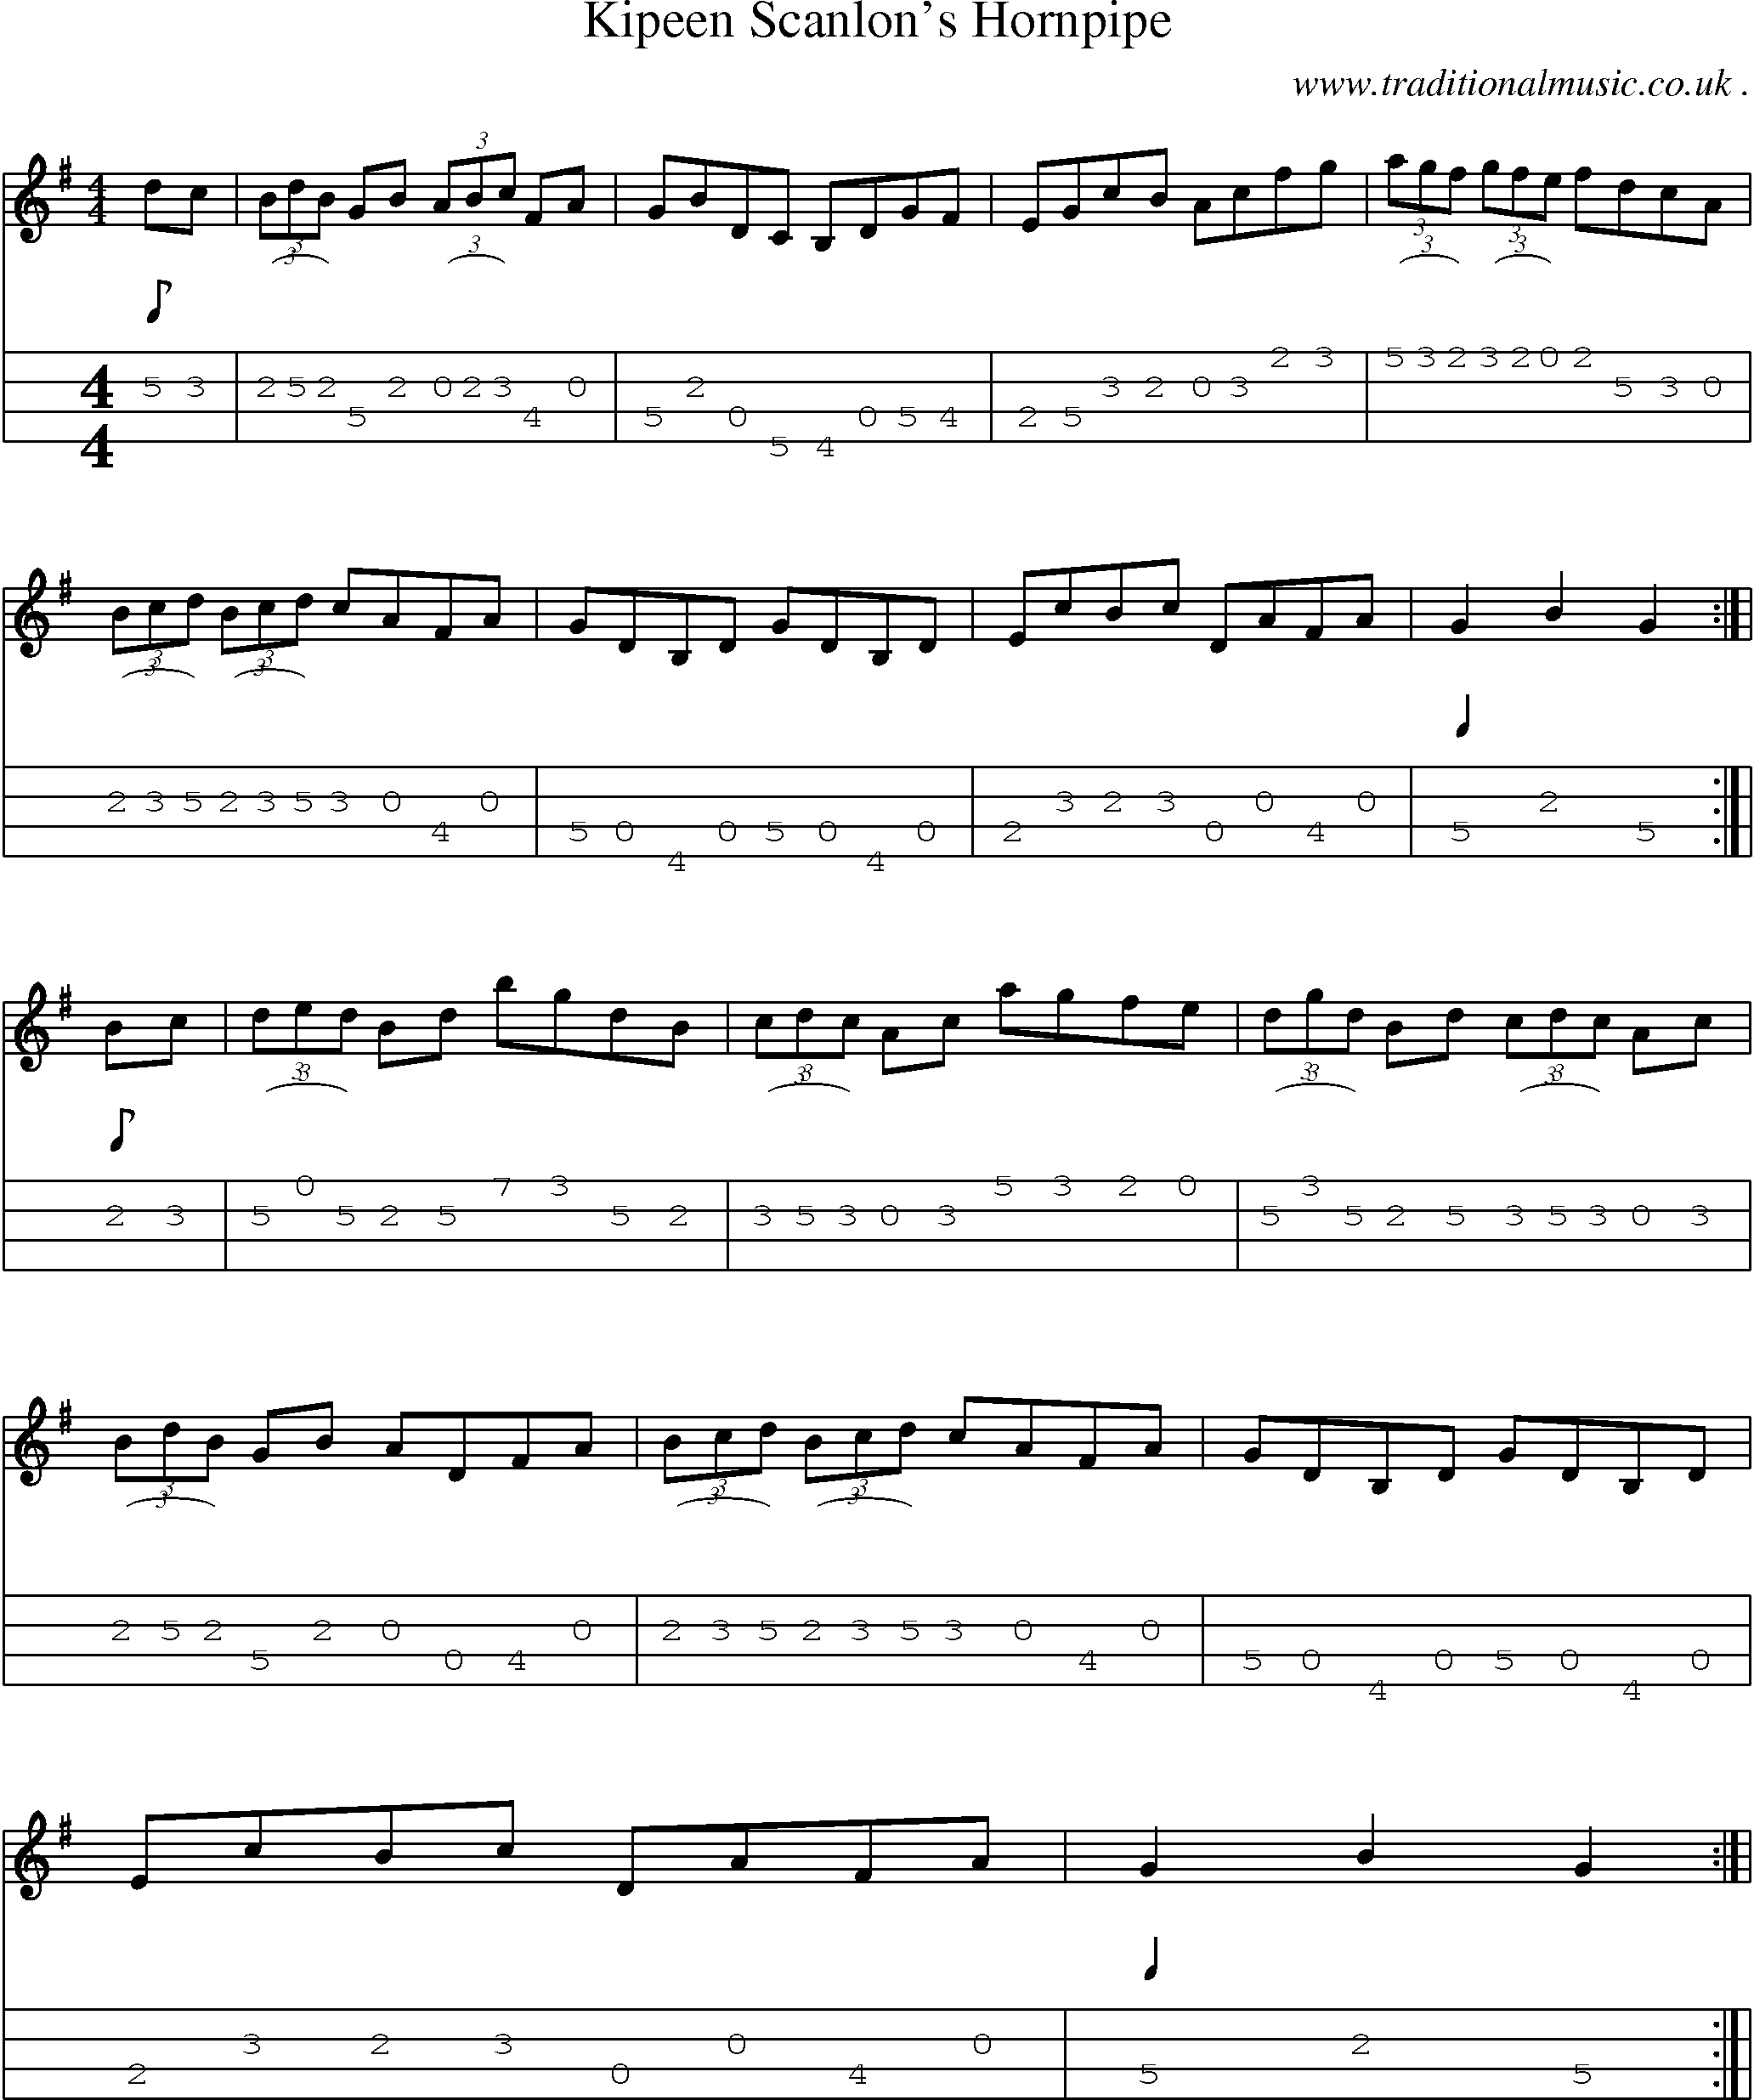 Sheet-Music and Mandolin Tabs for Kipeen Scanlons Hornpipe